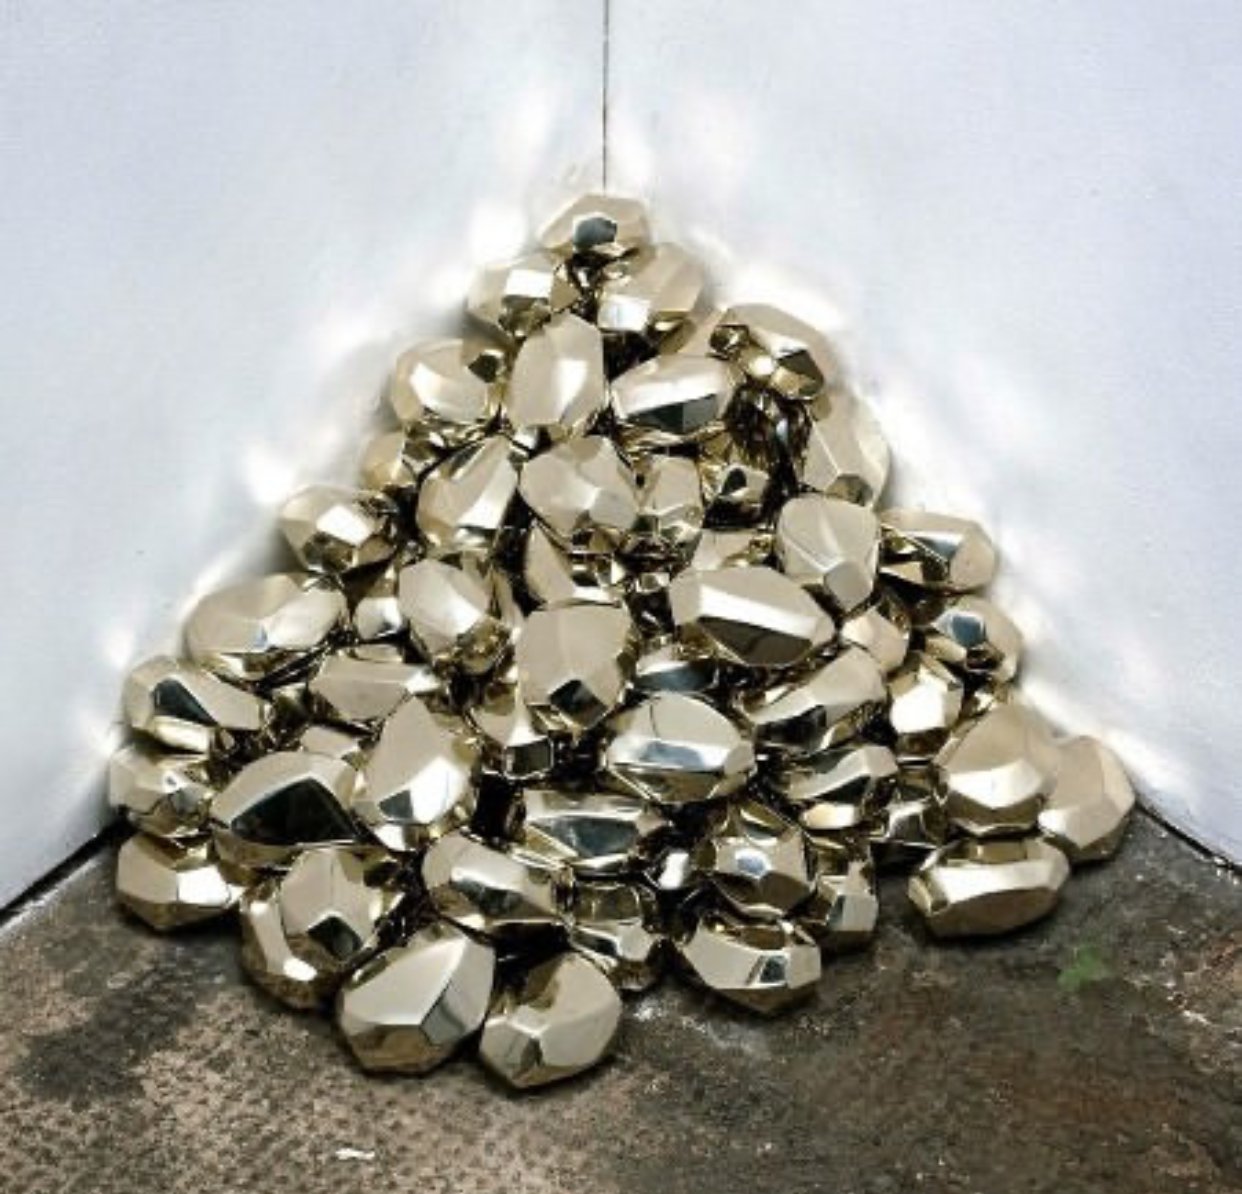 Stacked Pebbles stainless steel sculpture